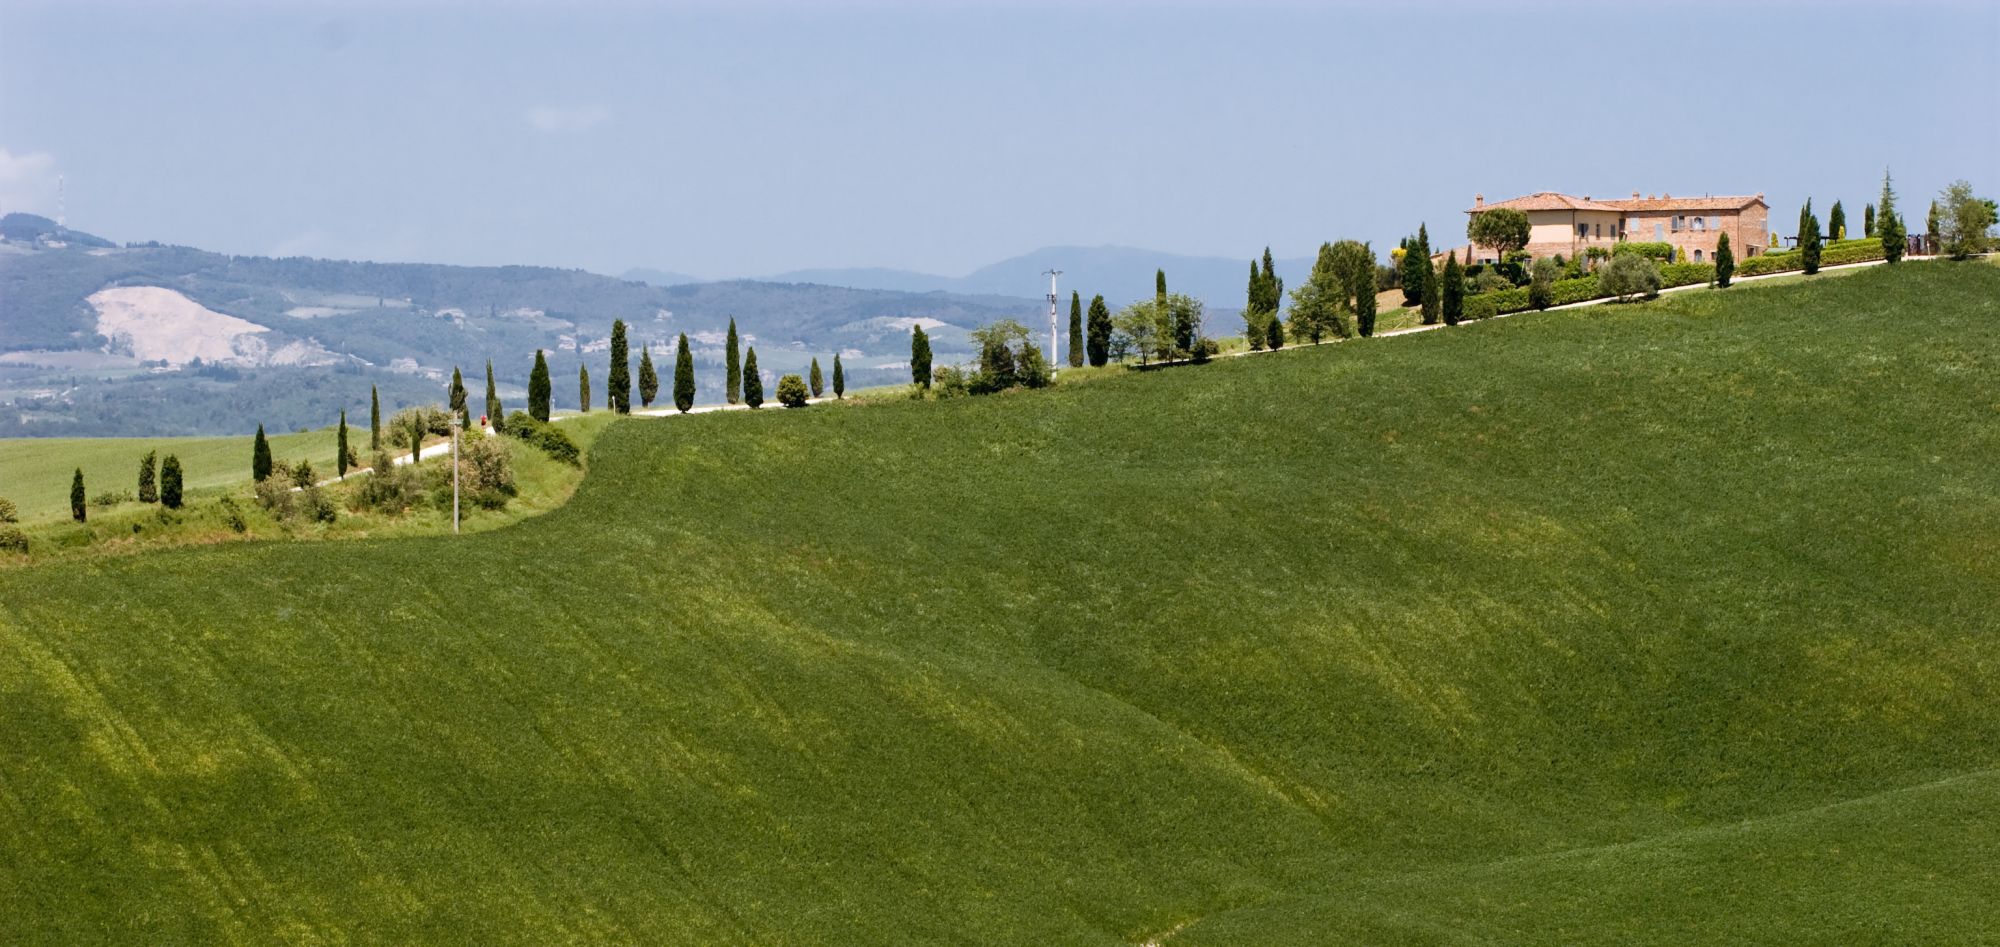 Private & Group Tours of Tuscany